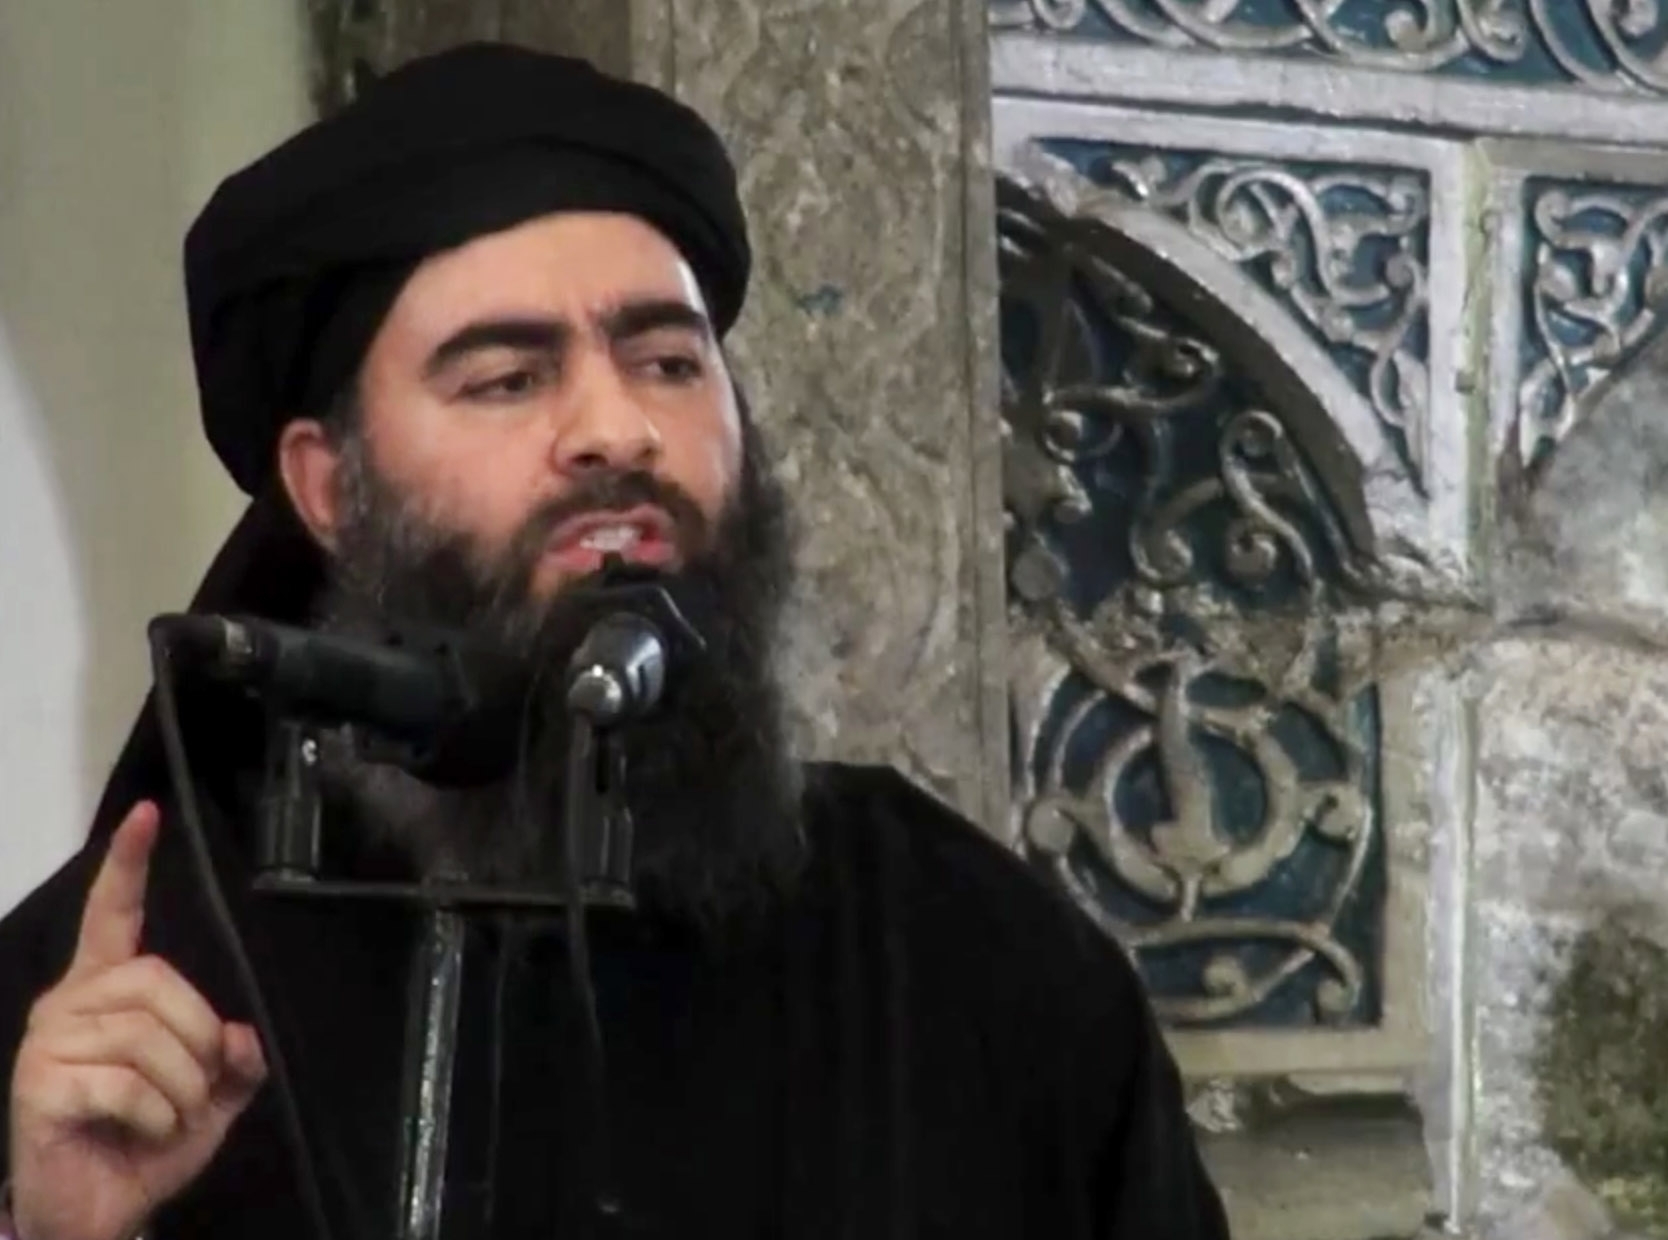 The leader of the Islamic State group, Abu Bakr al-Baghdadi, delivers a sermon at a mosque in Iraq during his first public appearance, July 5, 2014. [Photo: AP]